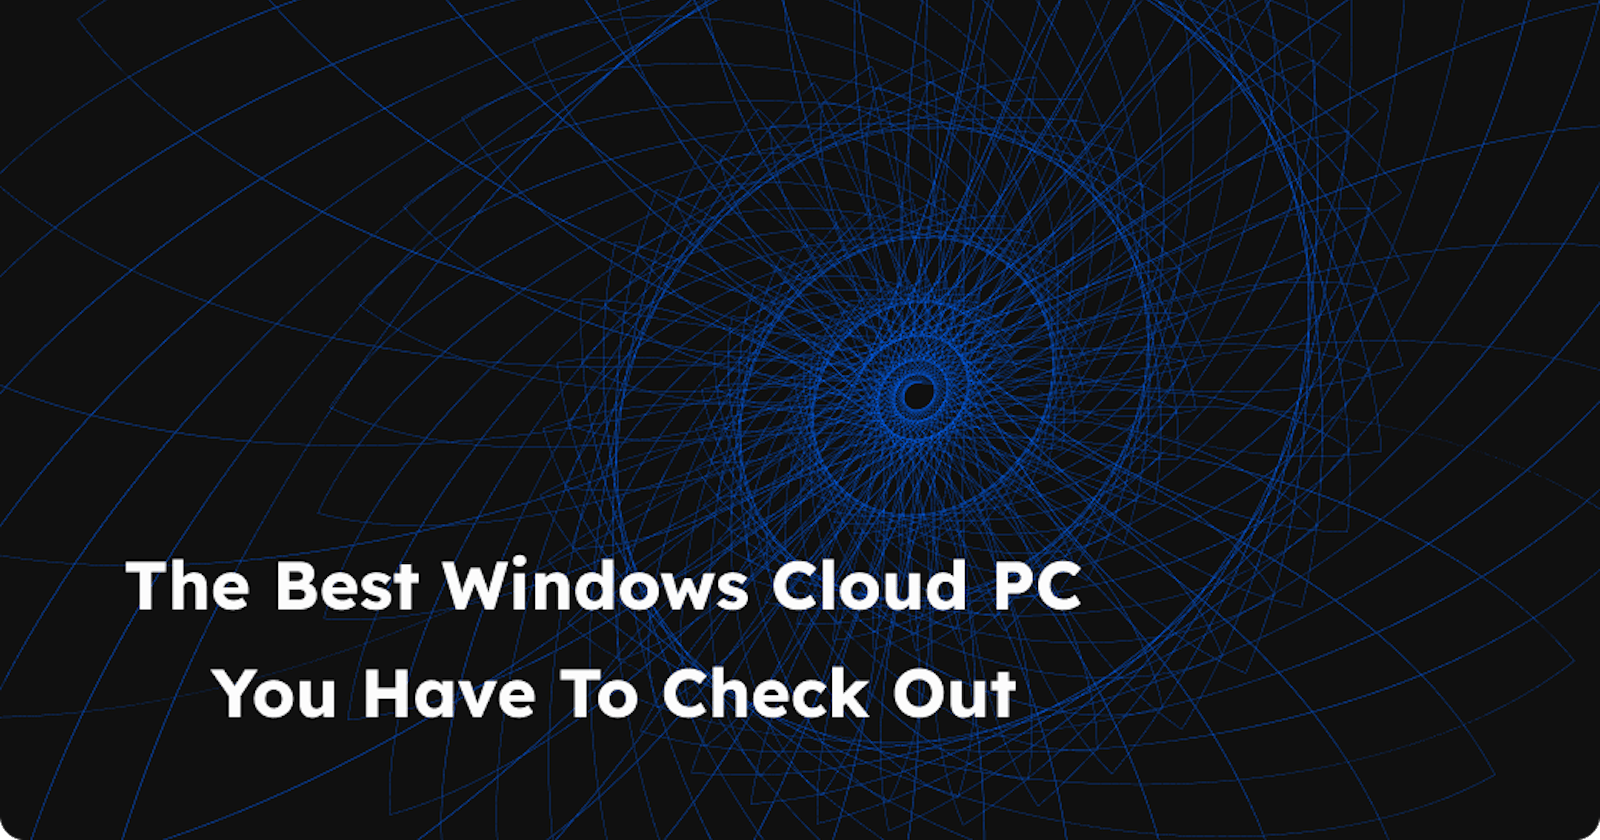 How Neverinstall Stacks Up Against Other Windows Cloud PCs
Neverinstall Team